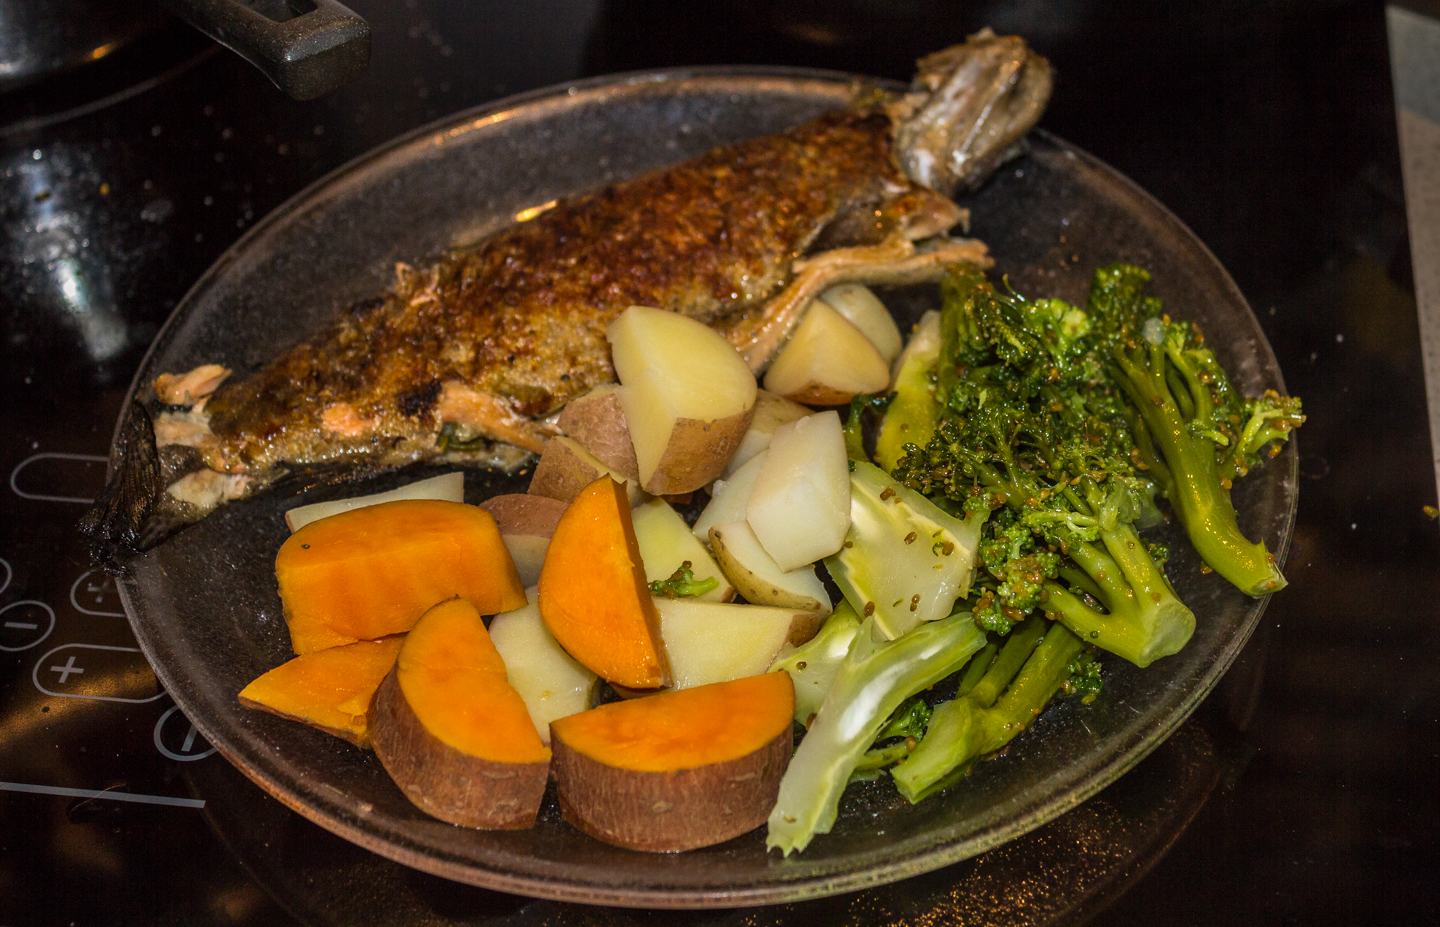 02/01/16 Garlic rosemary lemon baked trout with 3 different types of potatoes with home grown broccoli from seed